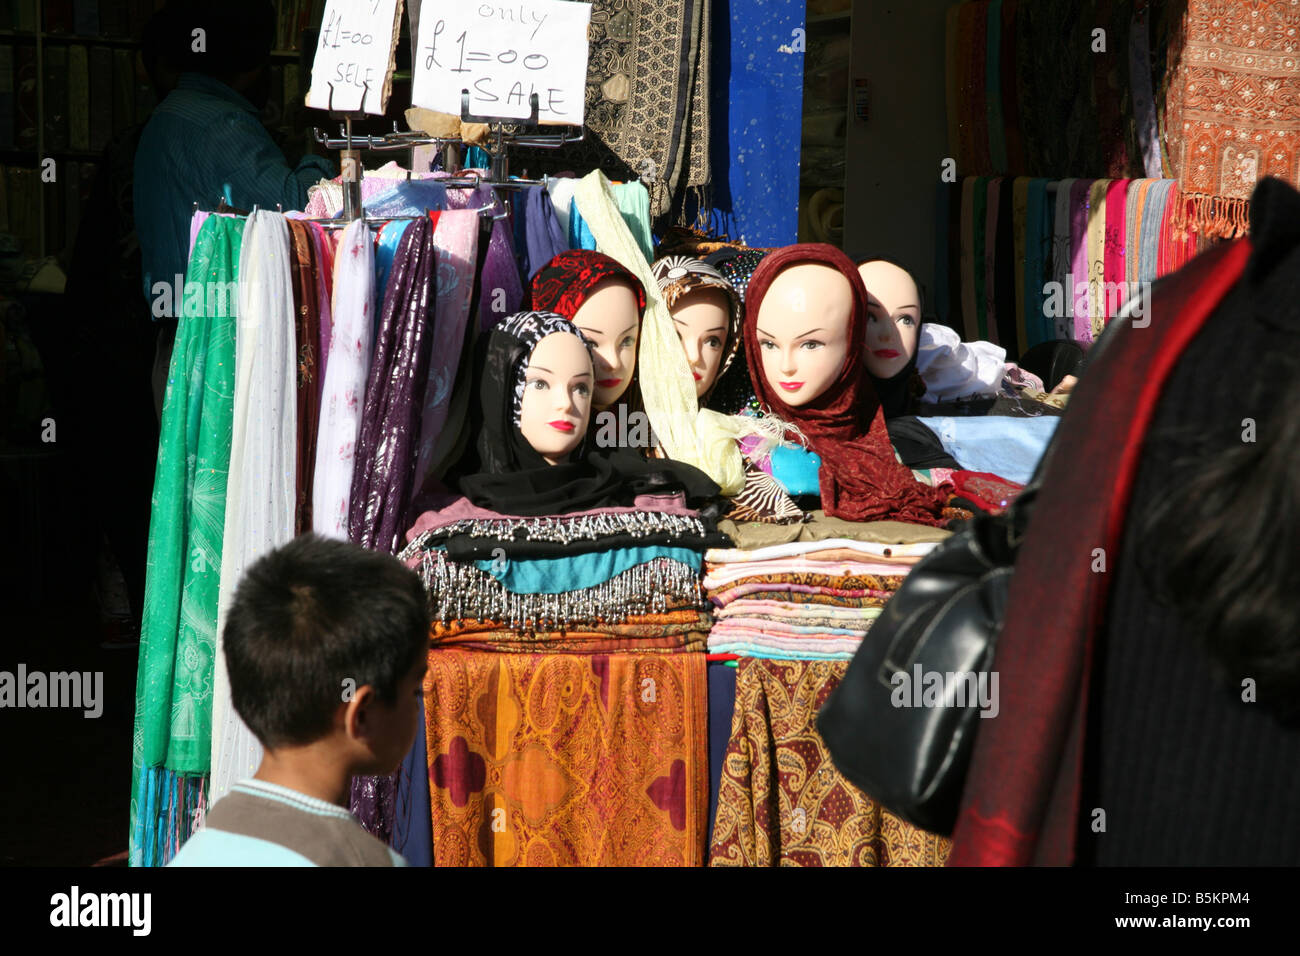 Headscarves for women on sale in shop in Southall Broadway London Stock Photo